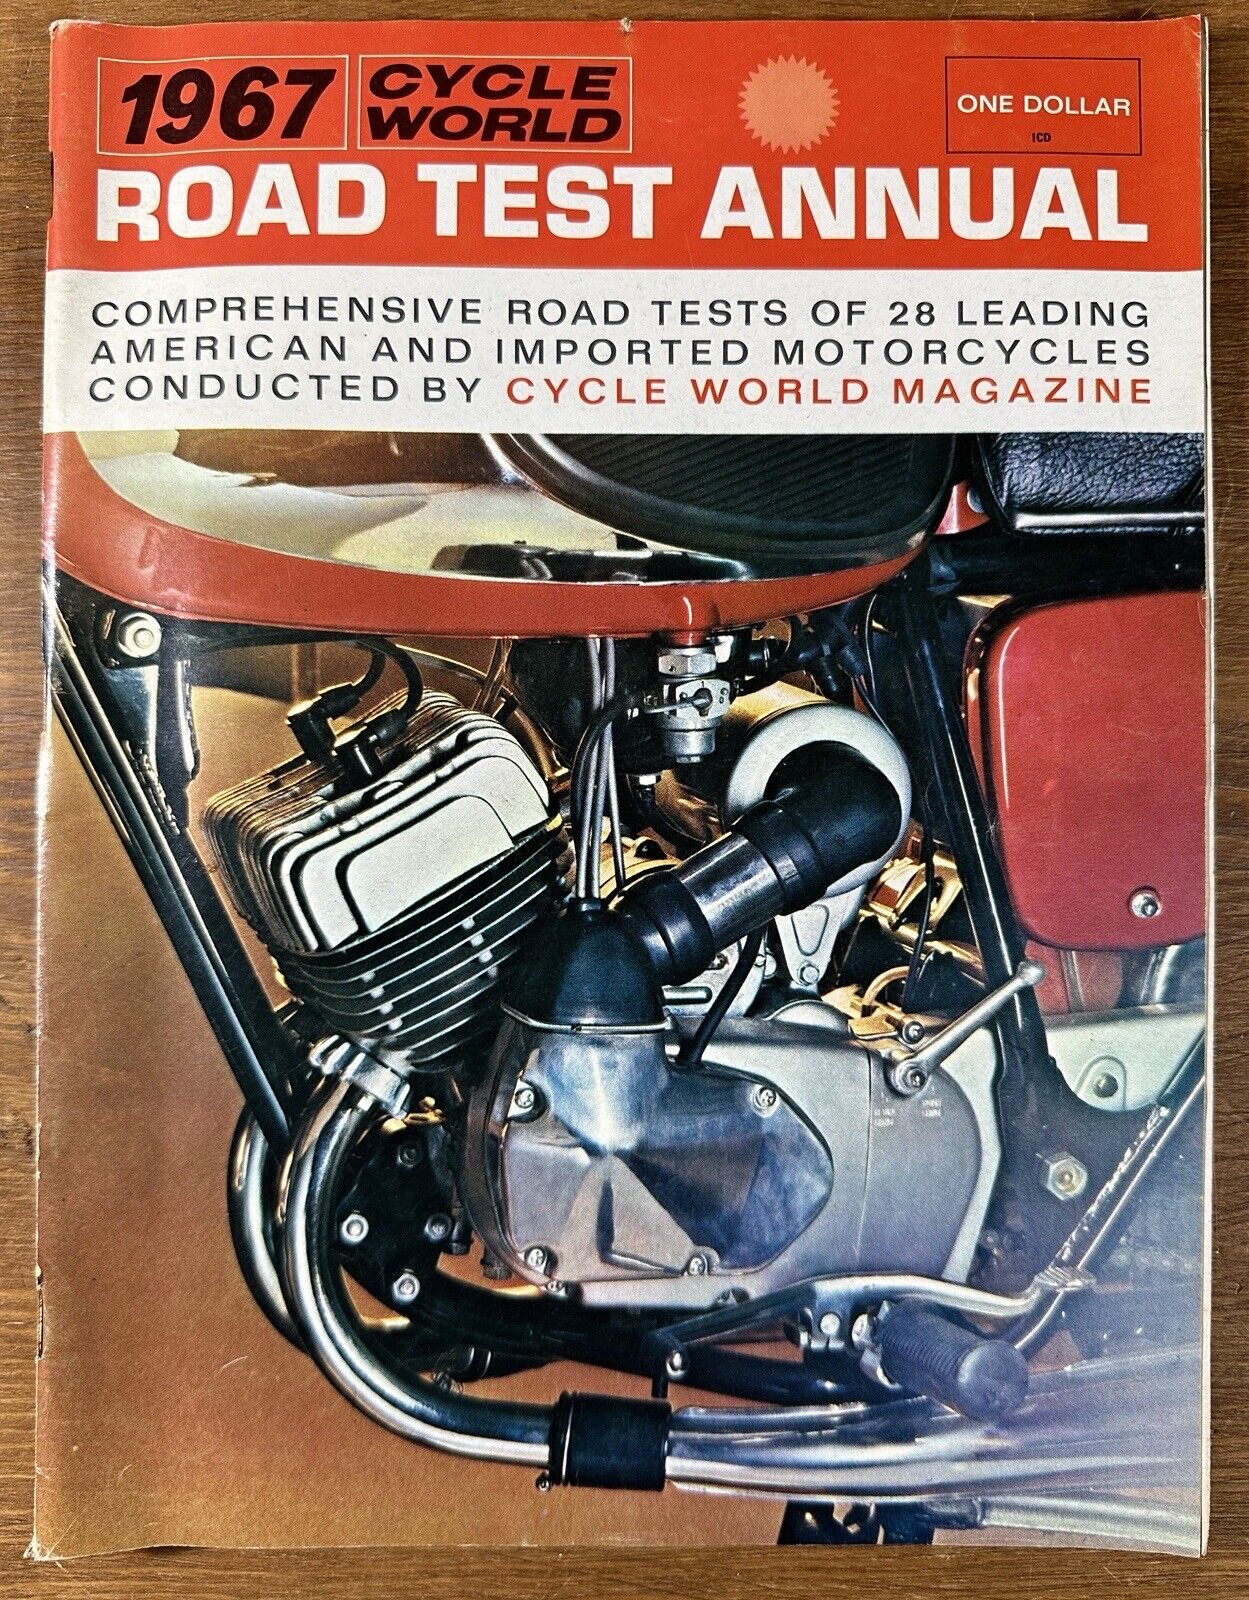 Vintage 1967 Cycle World Magazine Road Test Annual Motorcycle Very Good